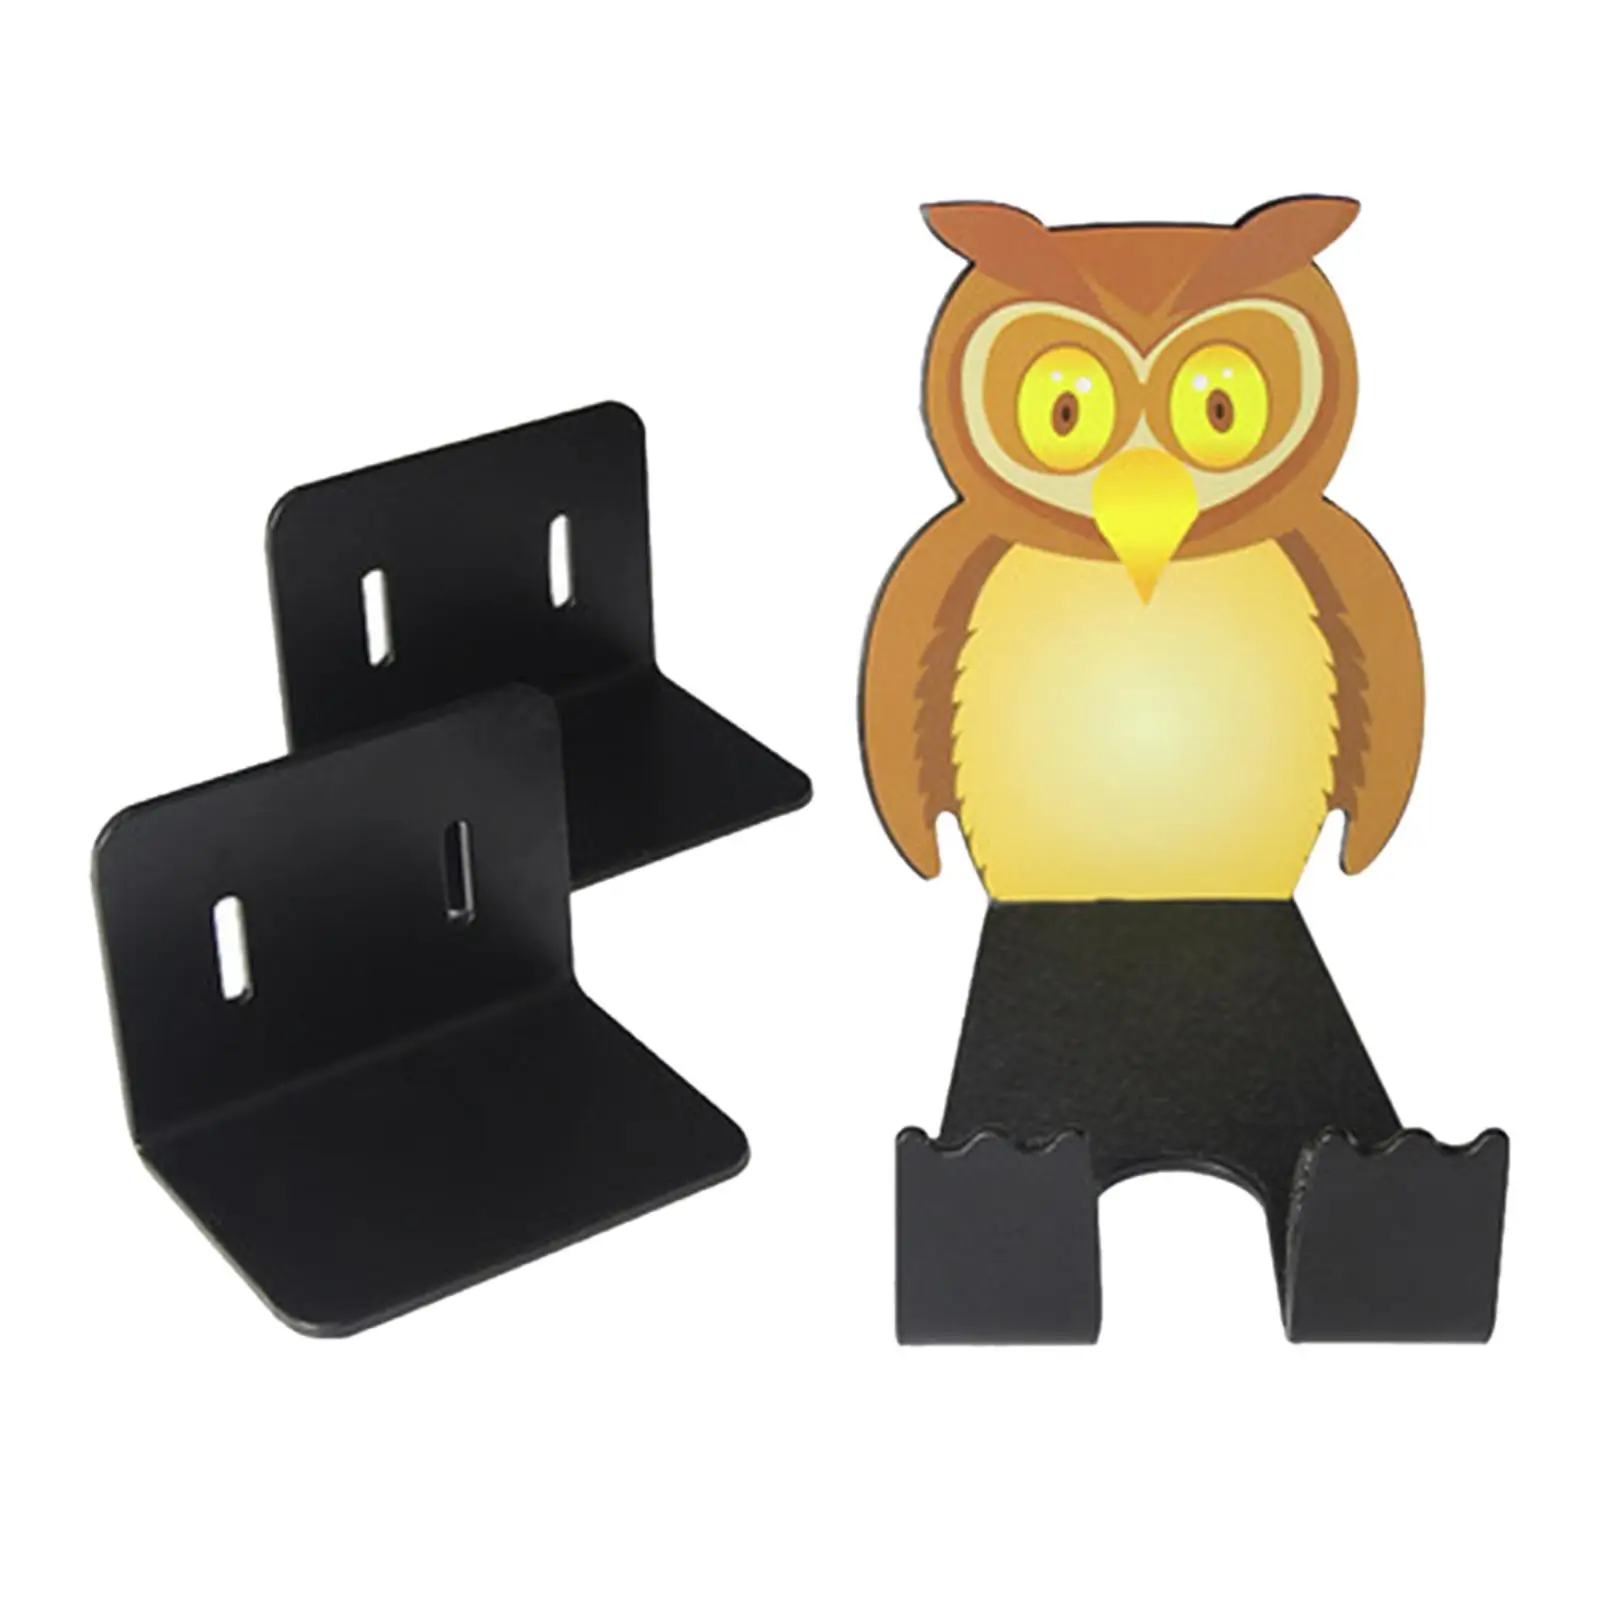 Mount, Cycling Pedal Wall Mount Hanger Hook with Owl Sticker, Wall Mounted Rack